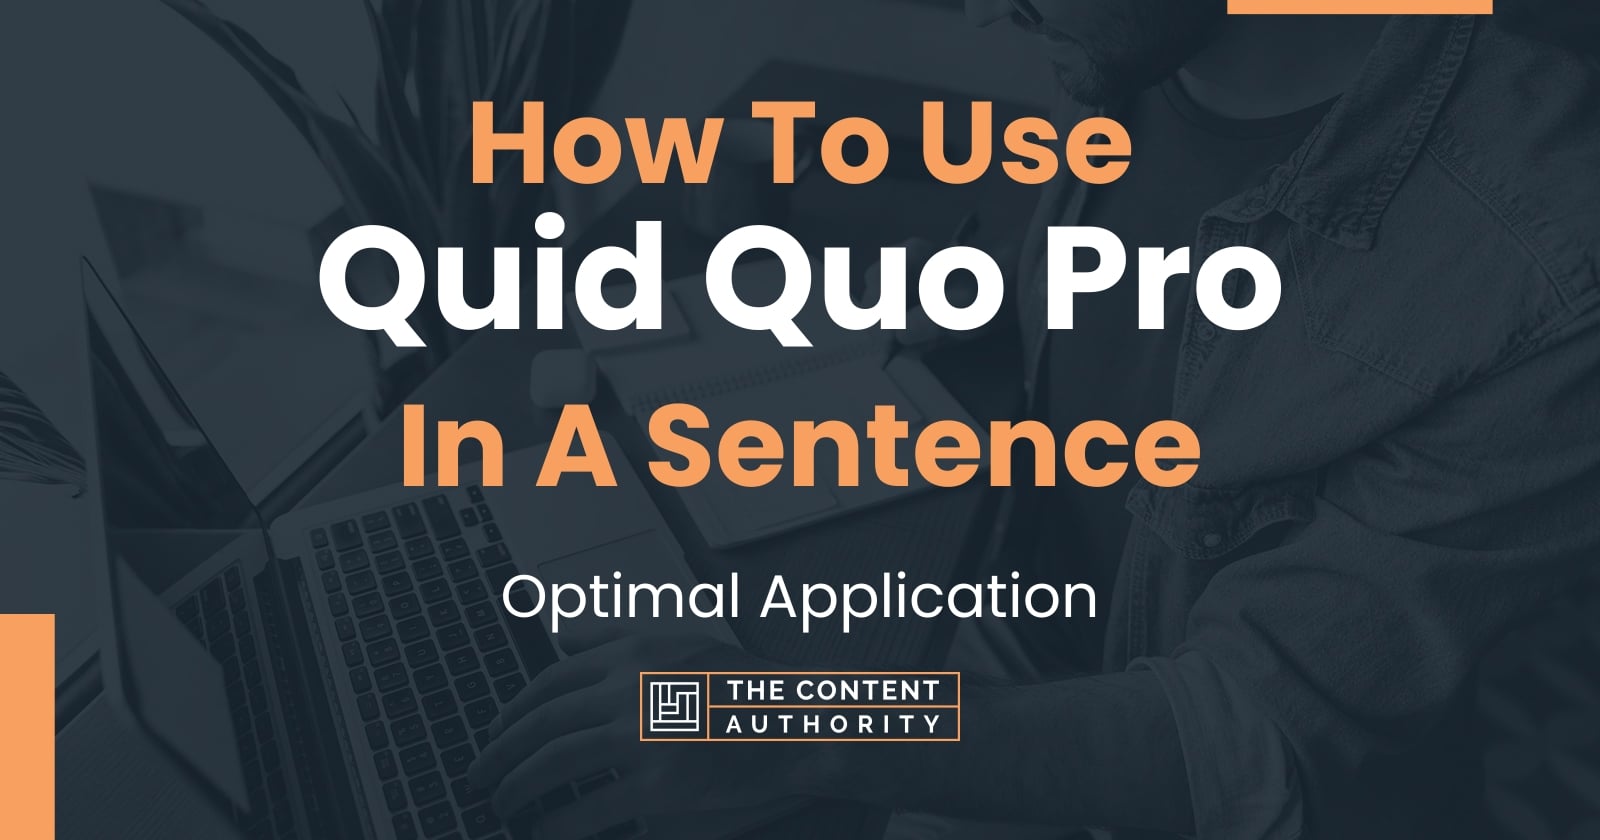 How To Use Quid Quo Pro In A Sentence: Optimal Application